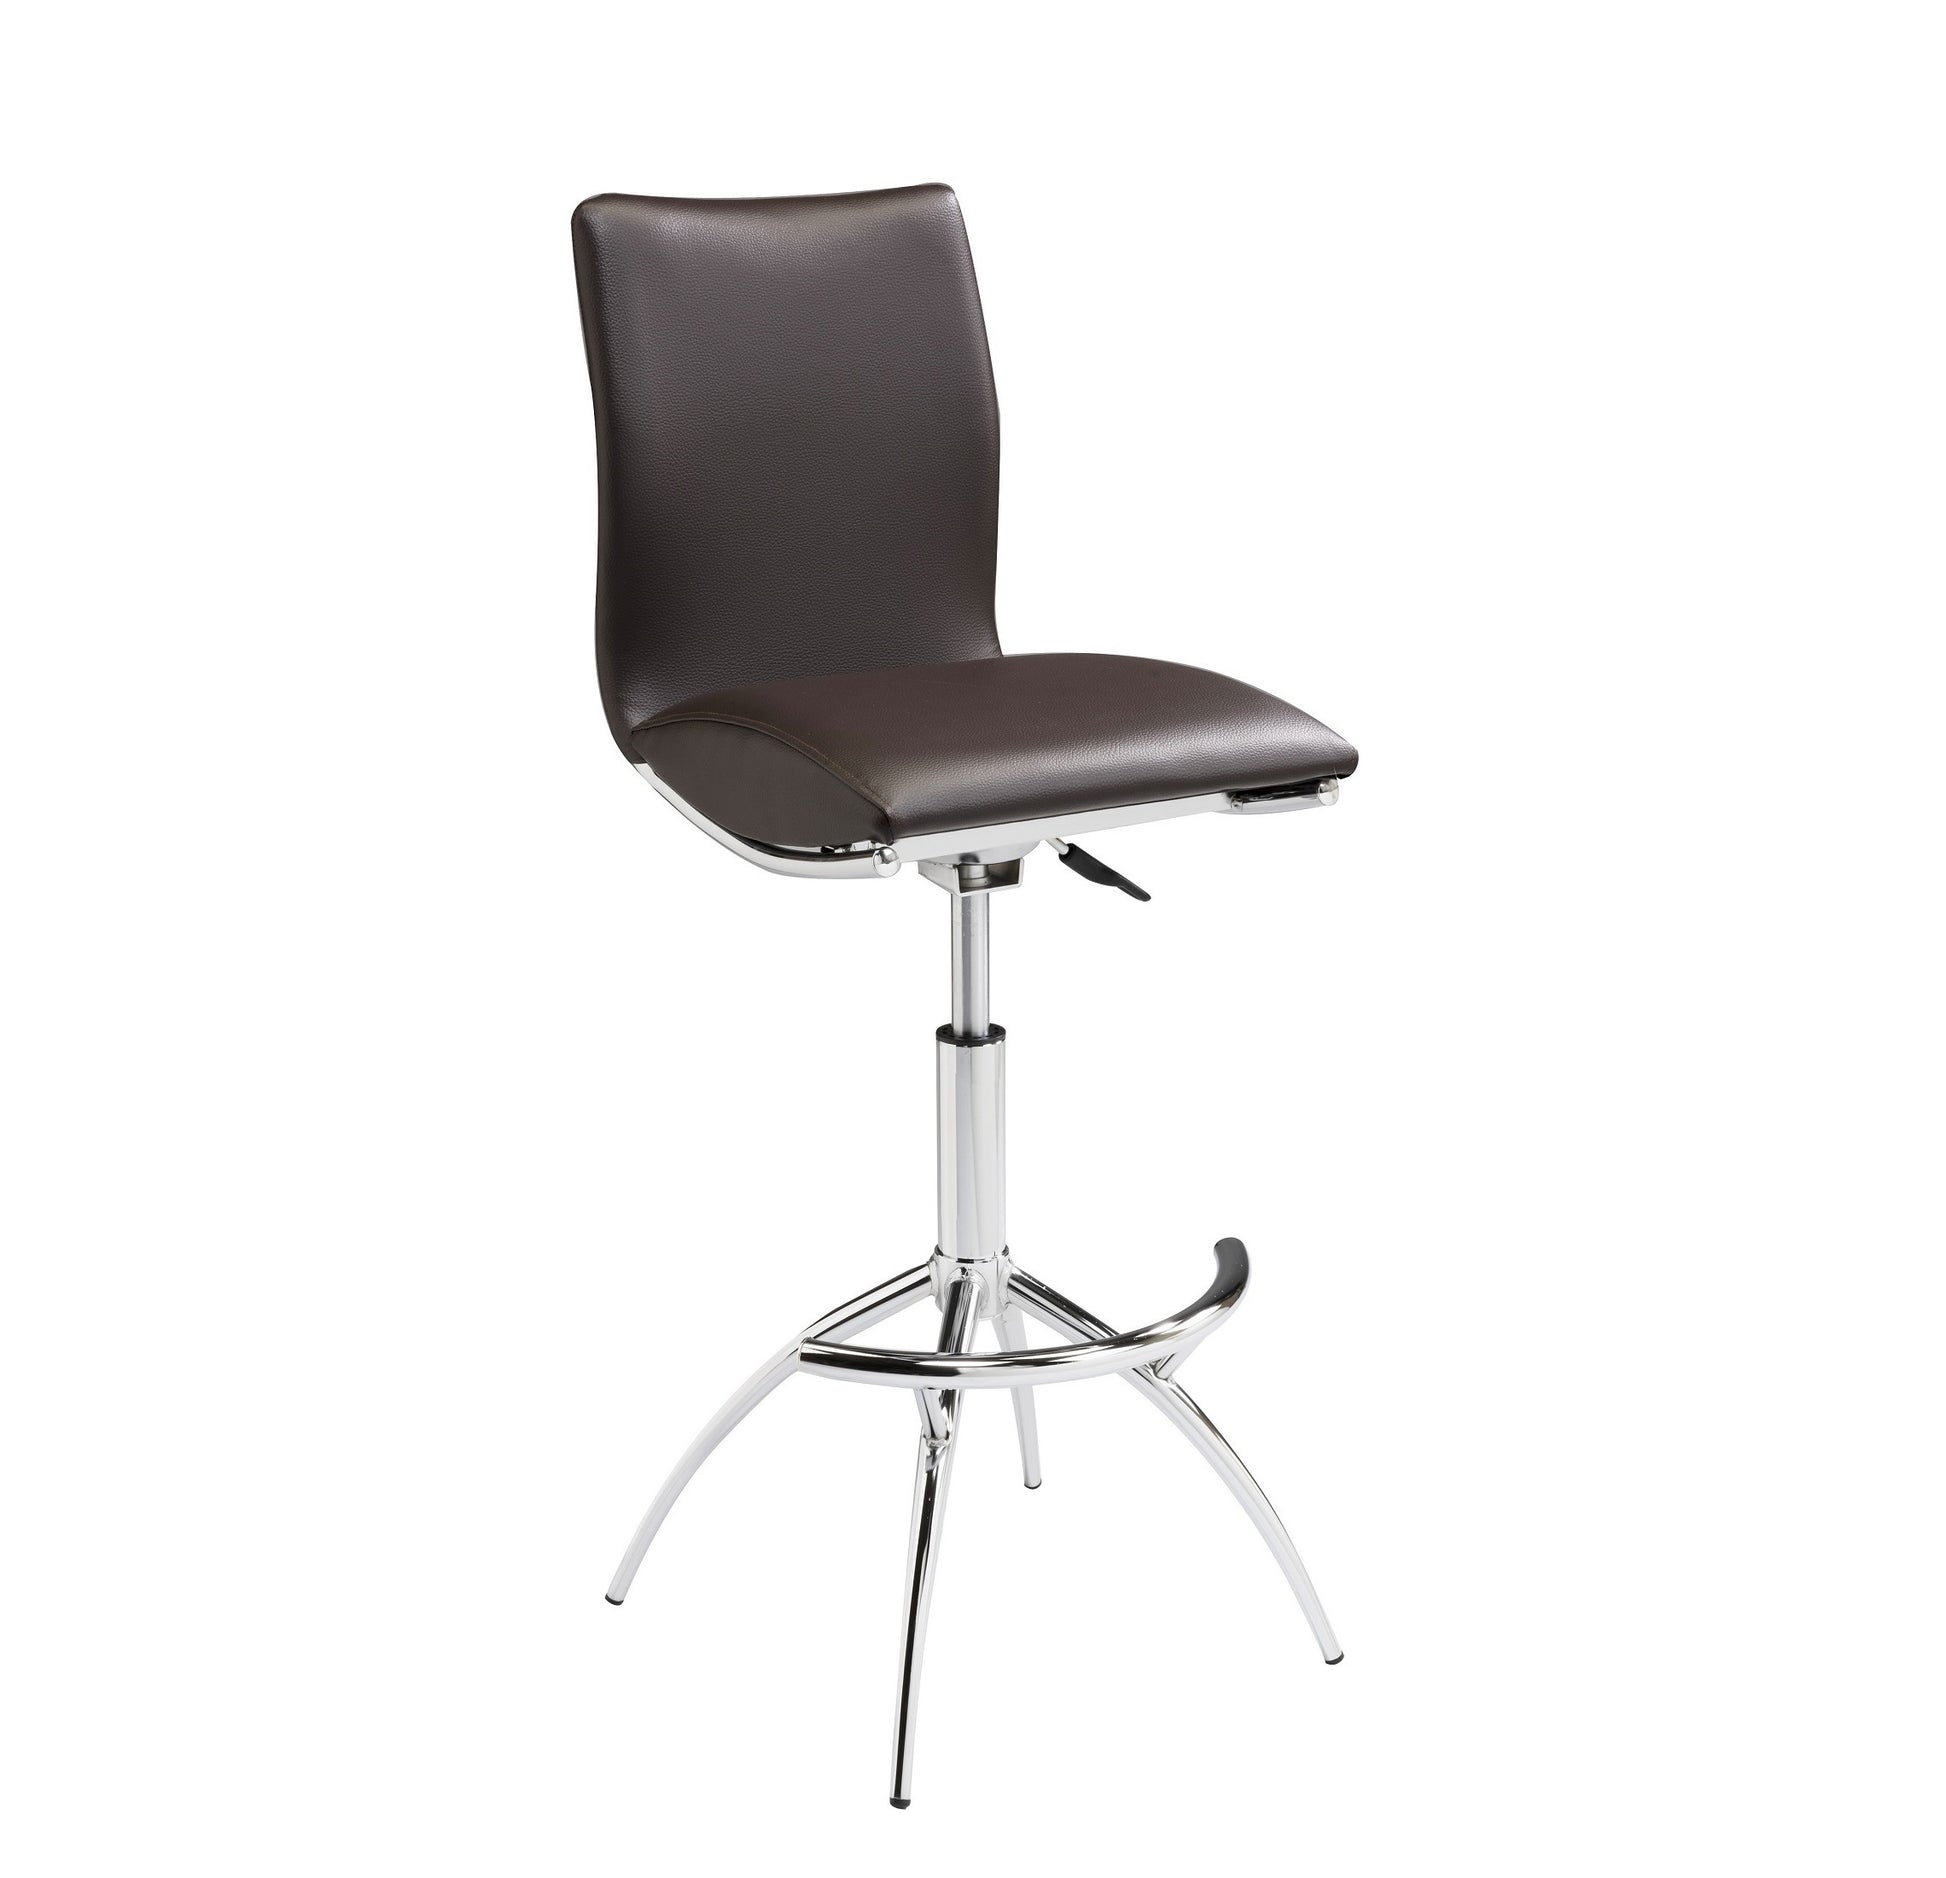 Modern Barstool Leatherette/Chrome Adjustable Height In Brown Color - Enova Luxe Home Store